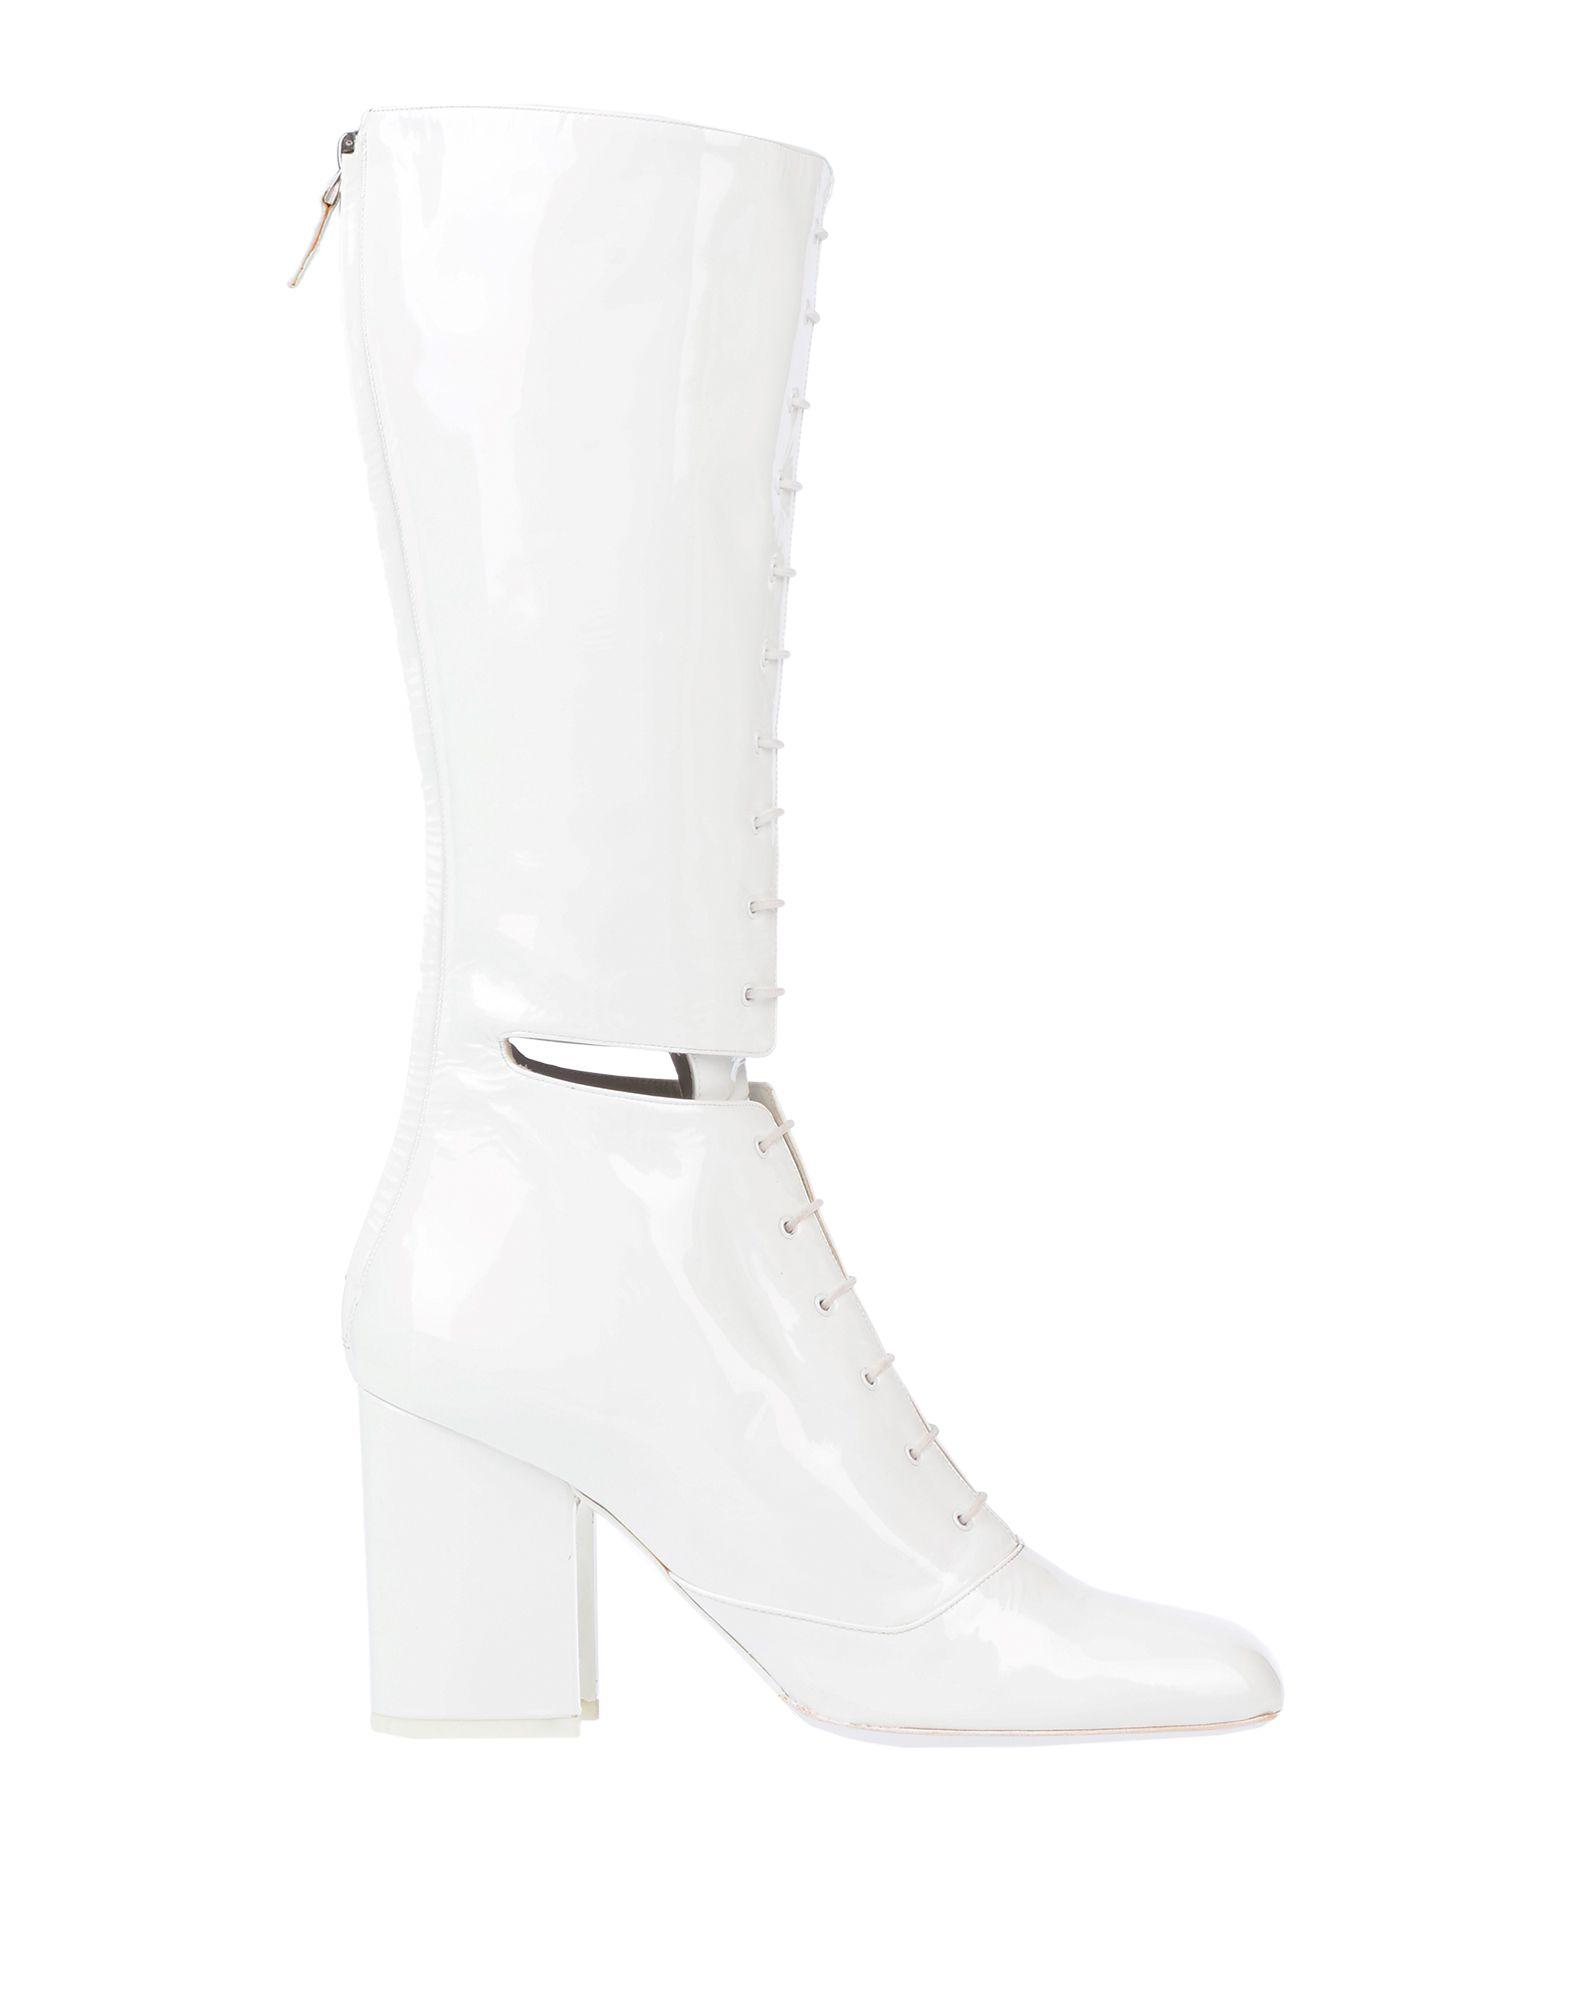 Jil Sander Leather Boots in White - Lyst